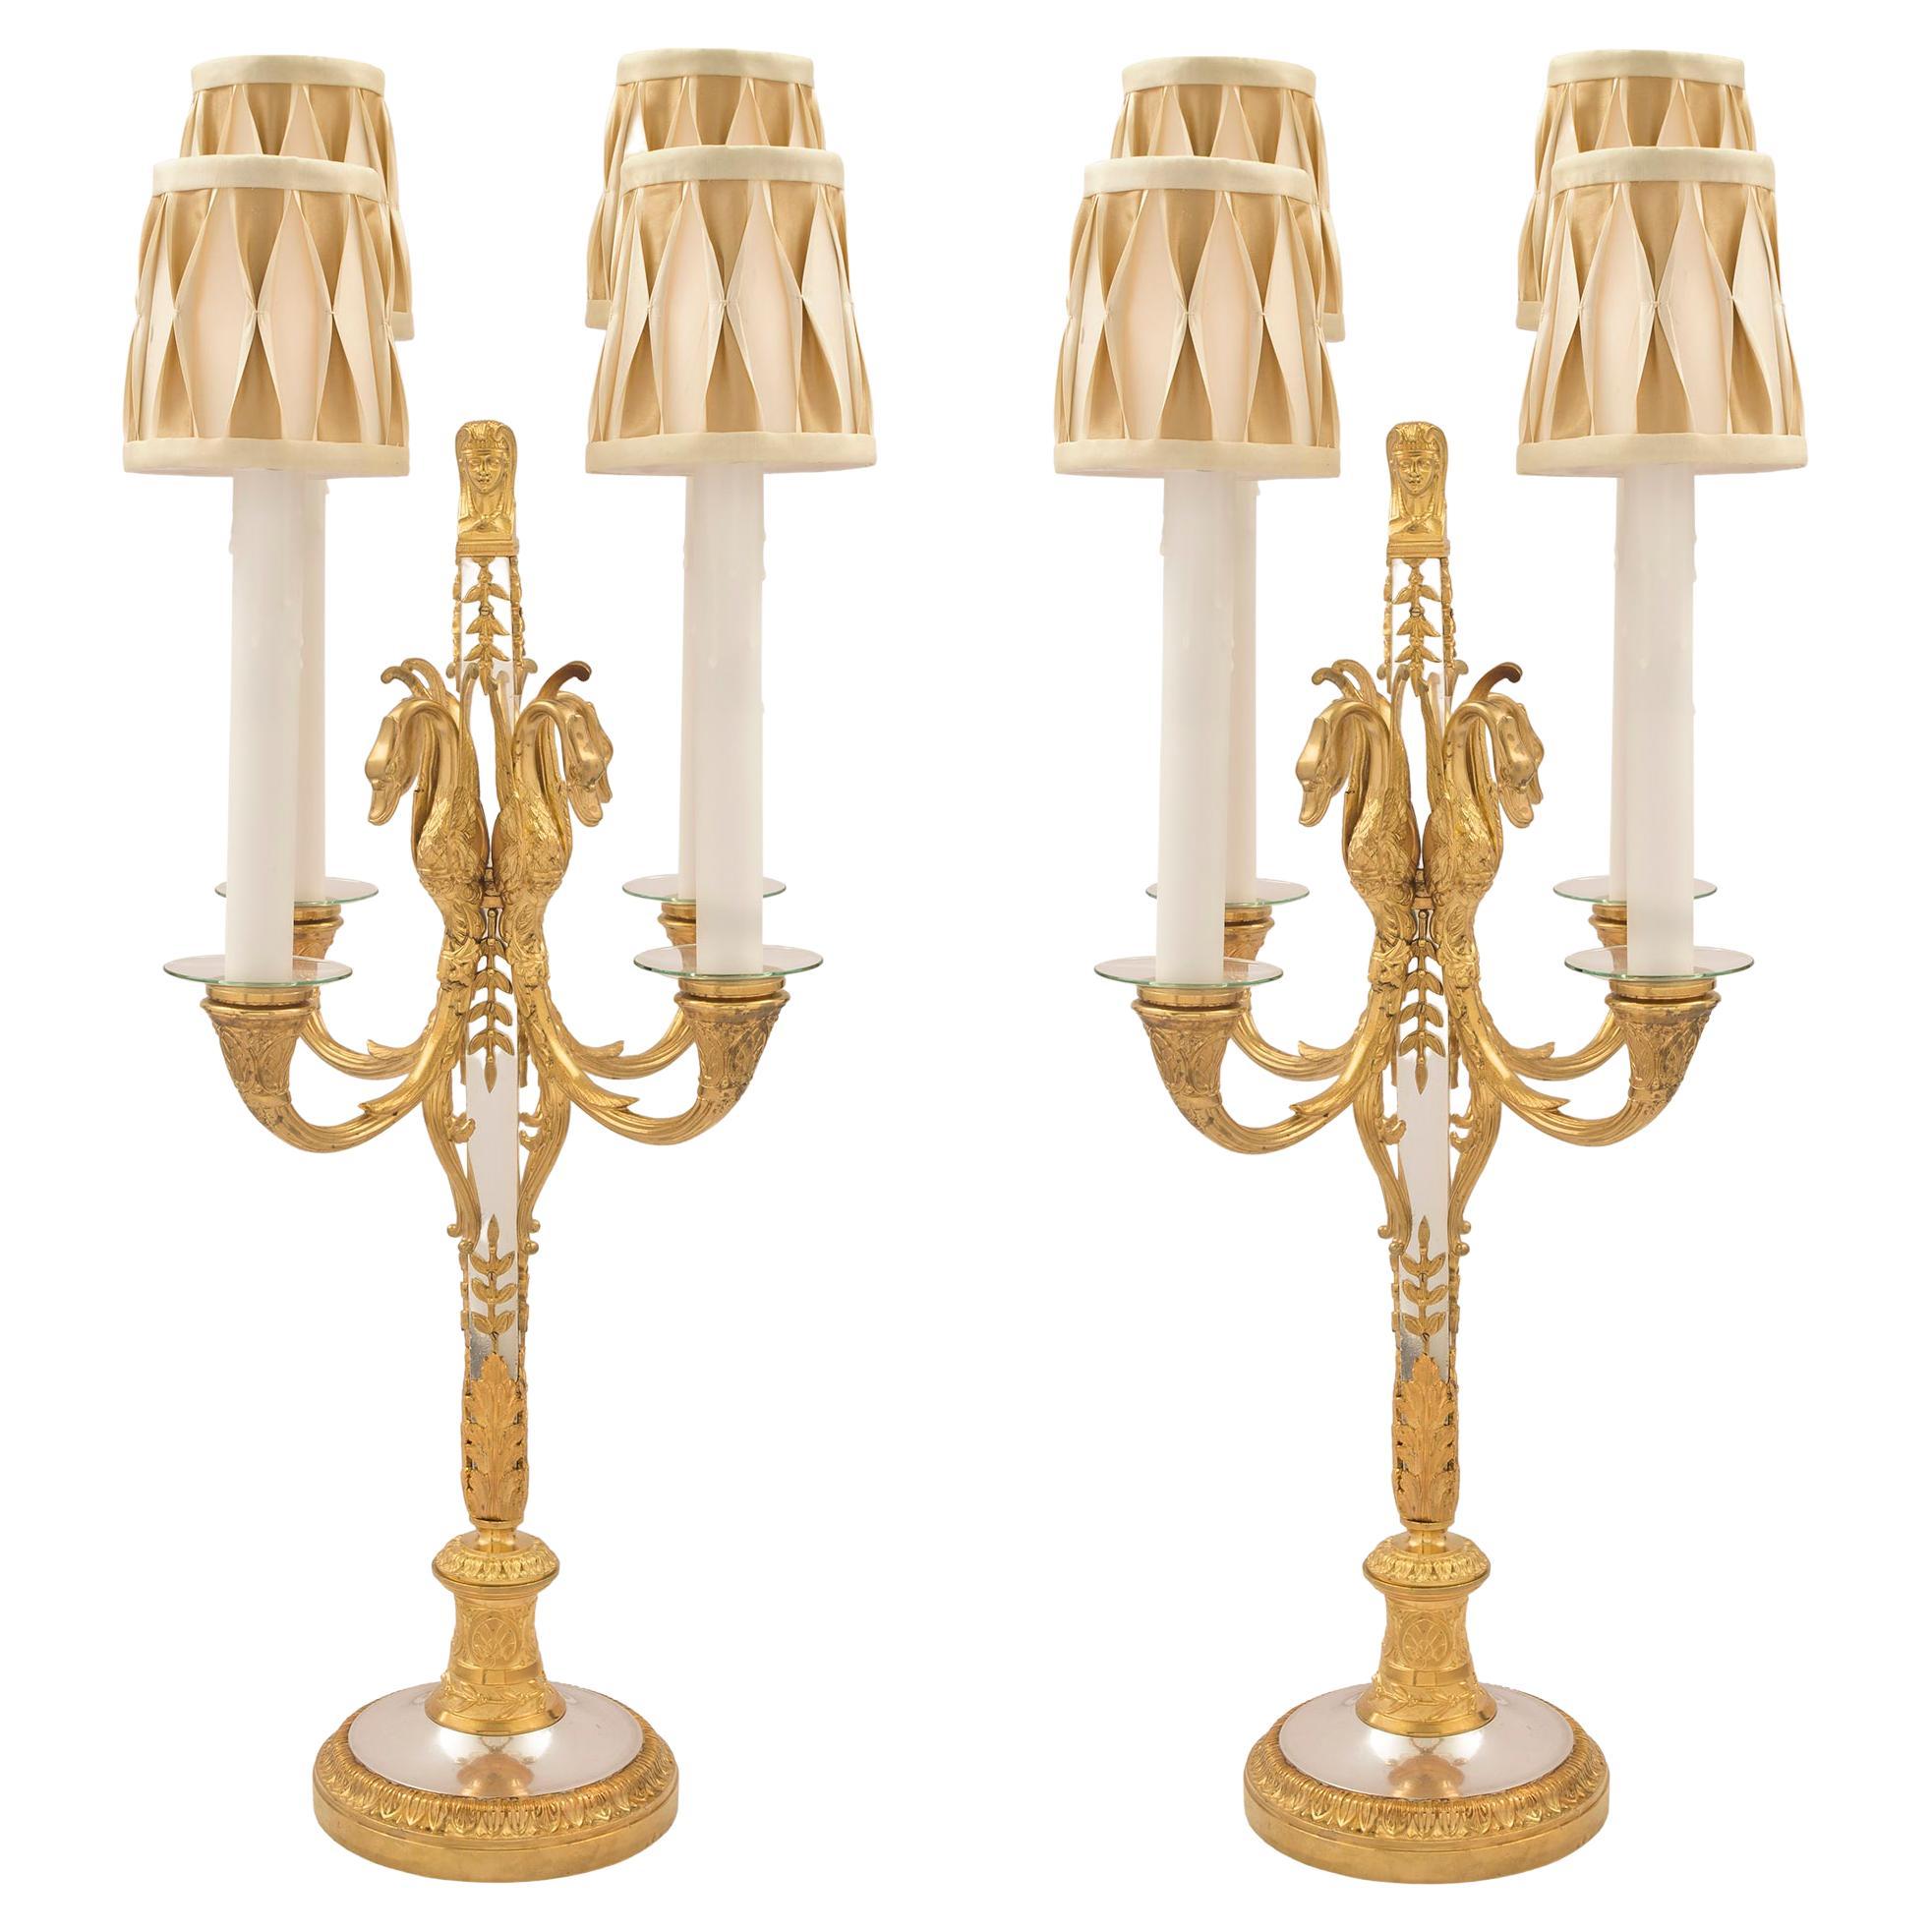 Pair of French Mid 19th Century Neo-Classical St. Candelabra Lamps For Sale